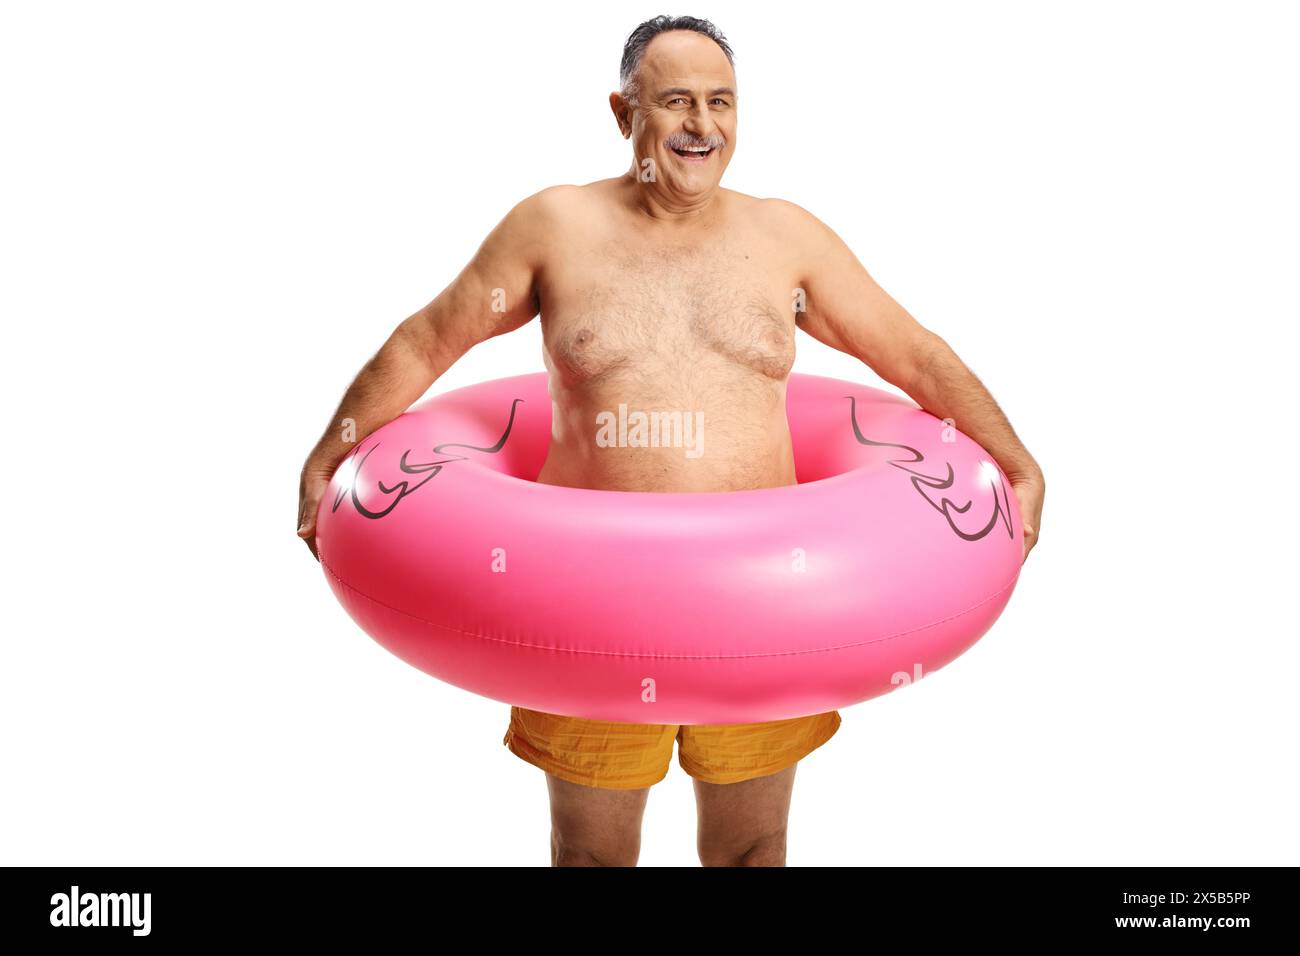 Smiling mature man in swimming shorts with inflatable flamingo rubber ring isolated on white background Stock Photo